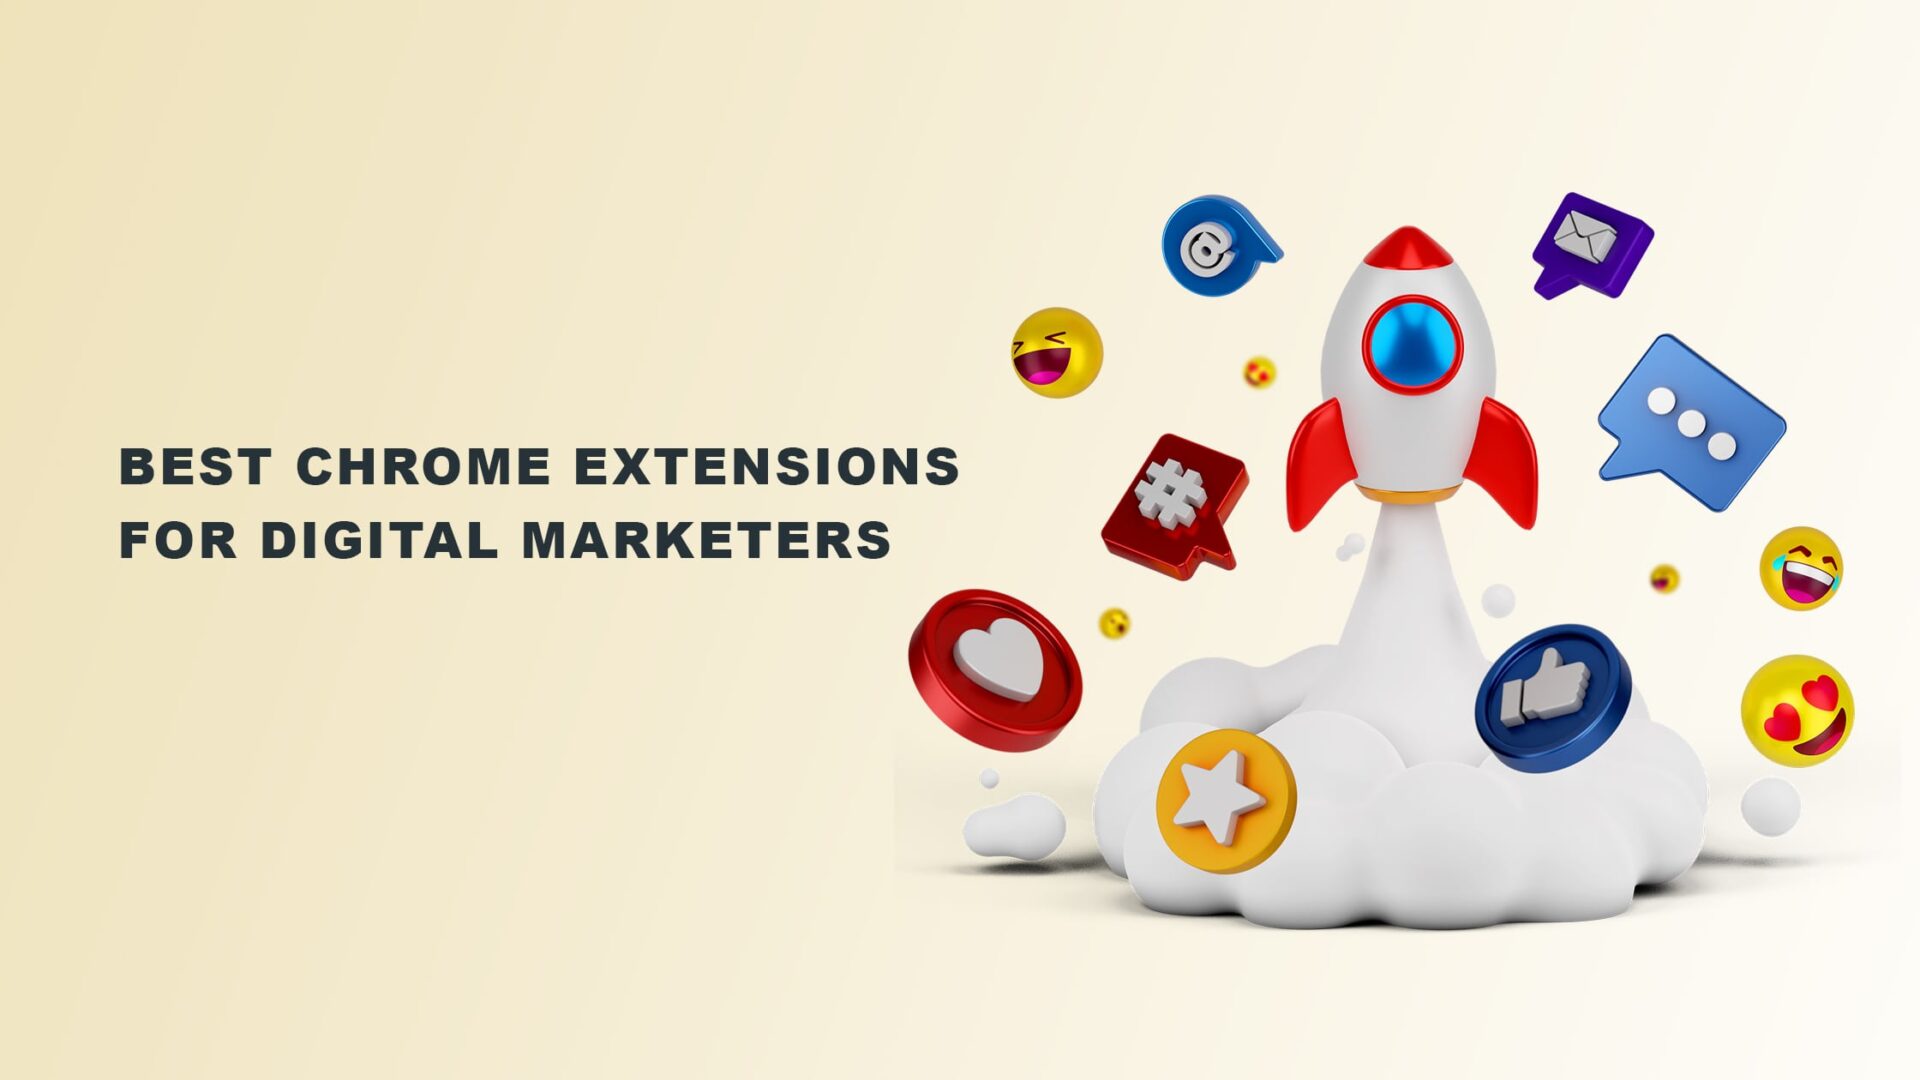 Best Chrome extensions for digital marketers